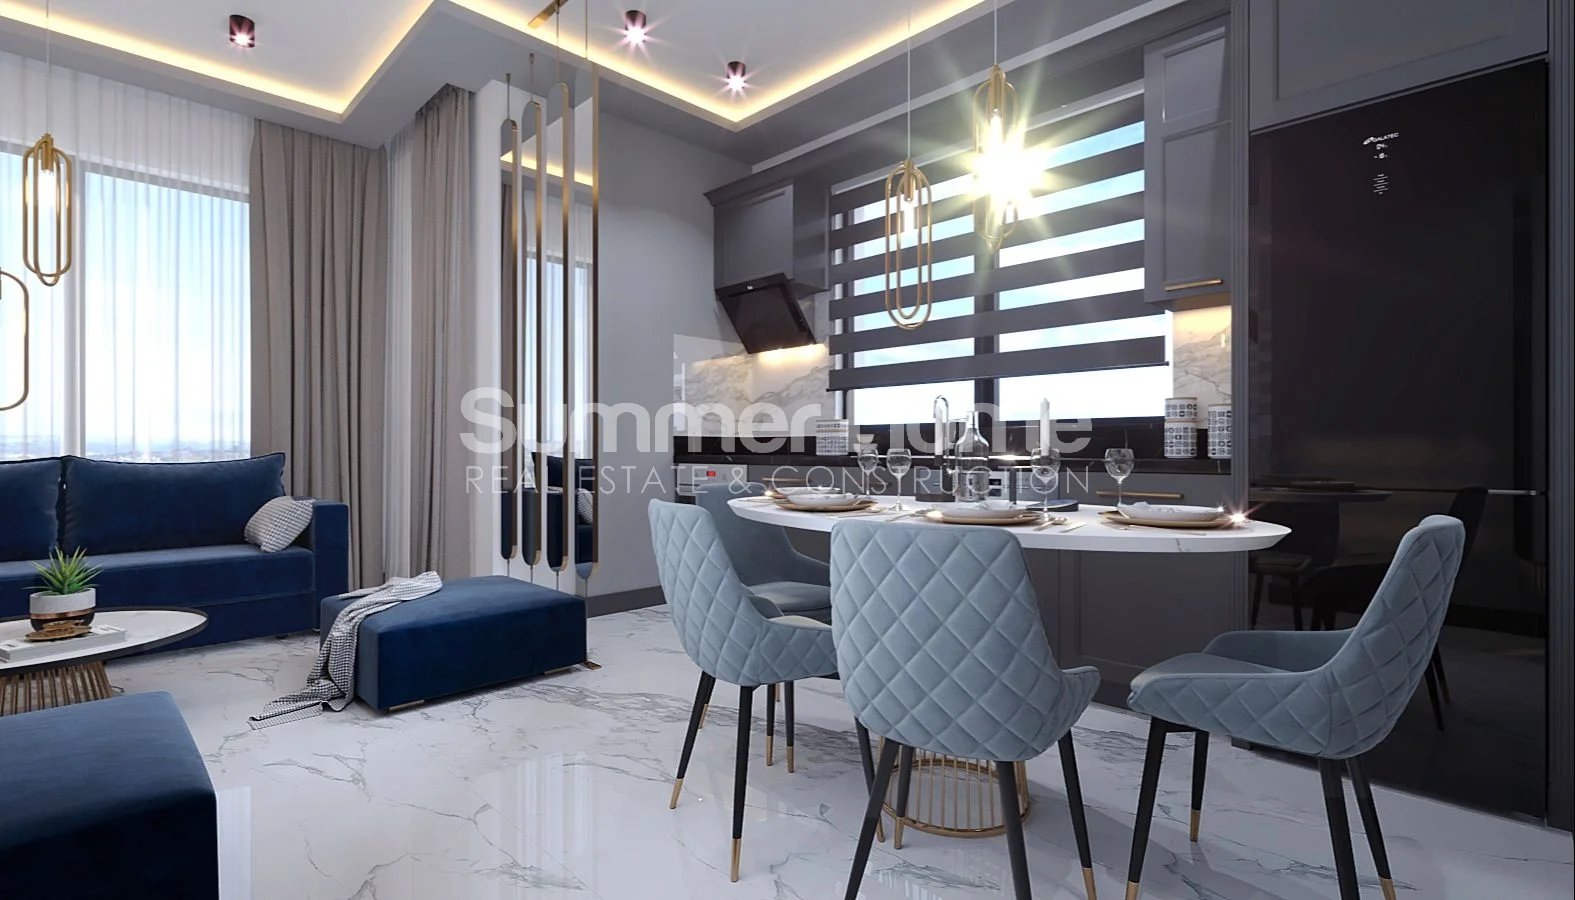 Modern apartments situated in the centre of Alanya Interior - 41